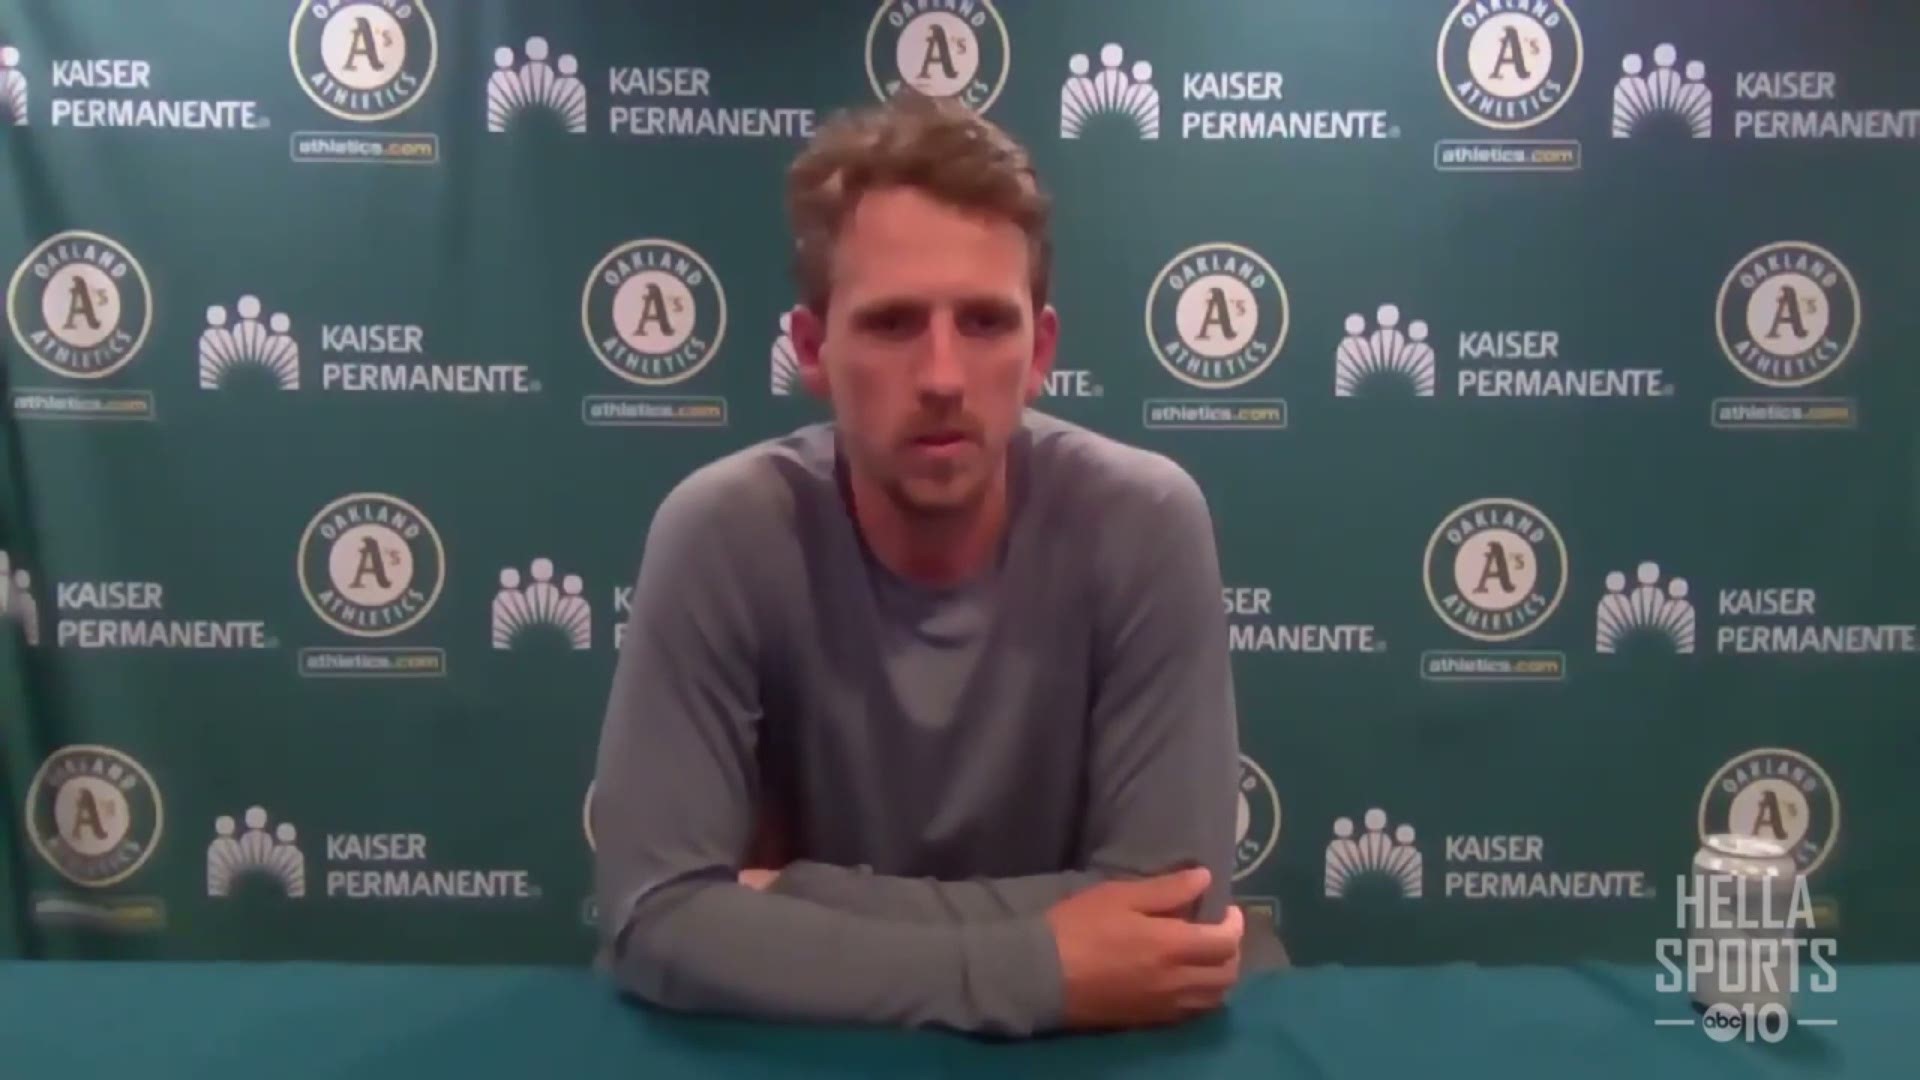 Stephen Piscotty talks about his heroics to lift Oakland over the Texas Rangers 5-1 by providing the A's with their second walk-off grand slam of the season.